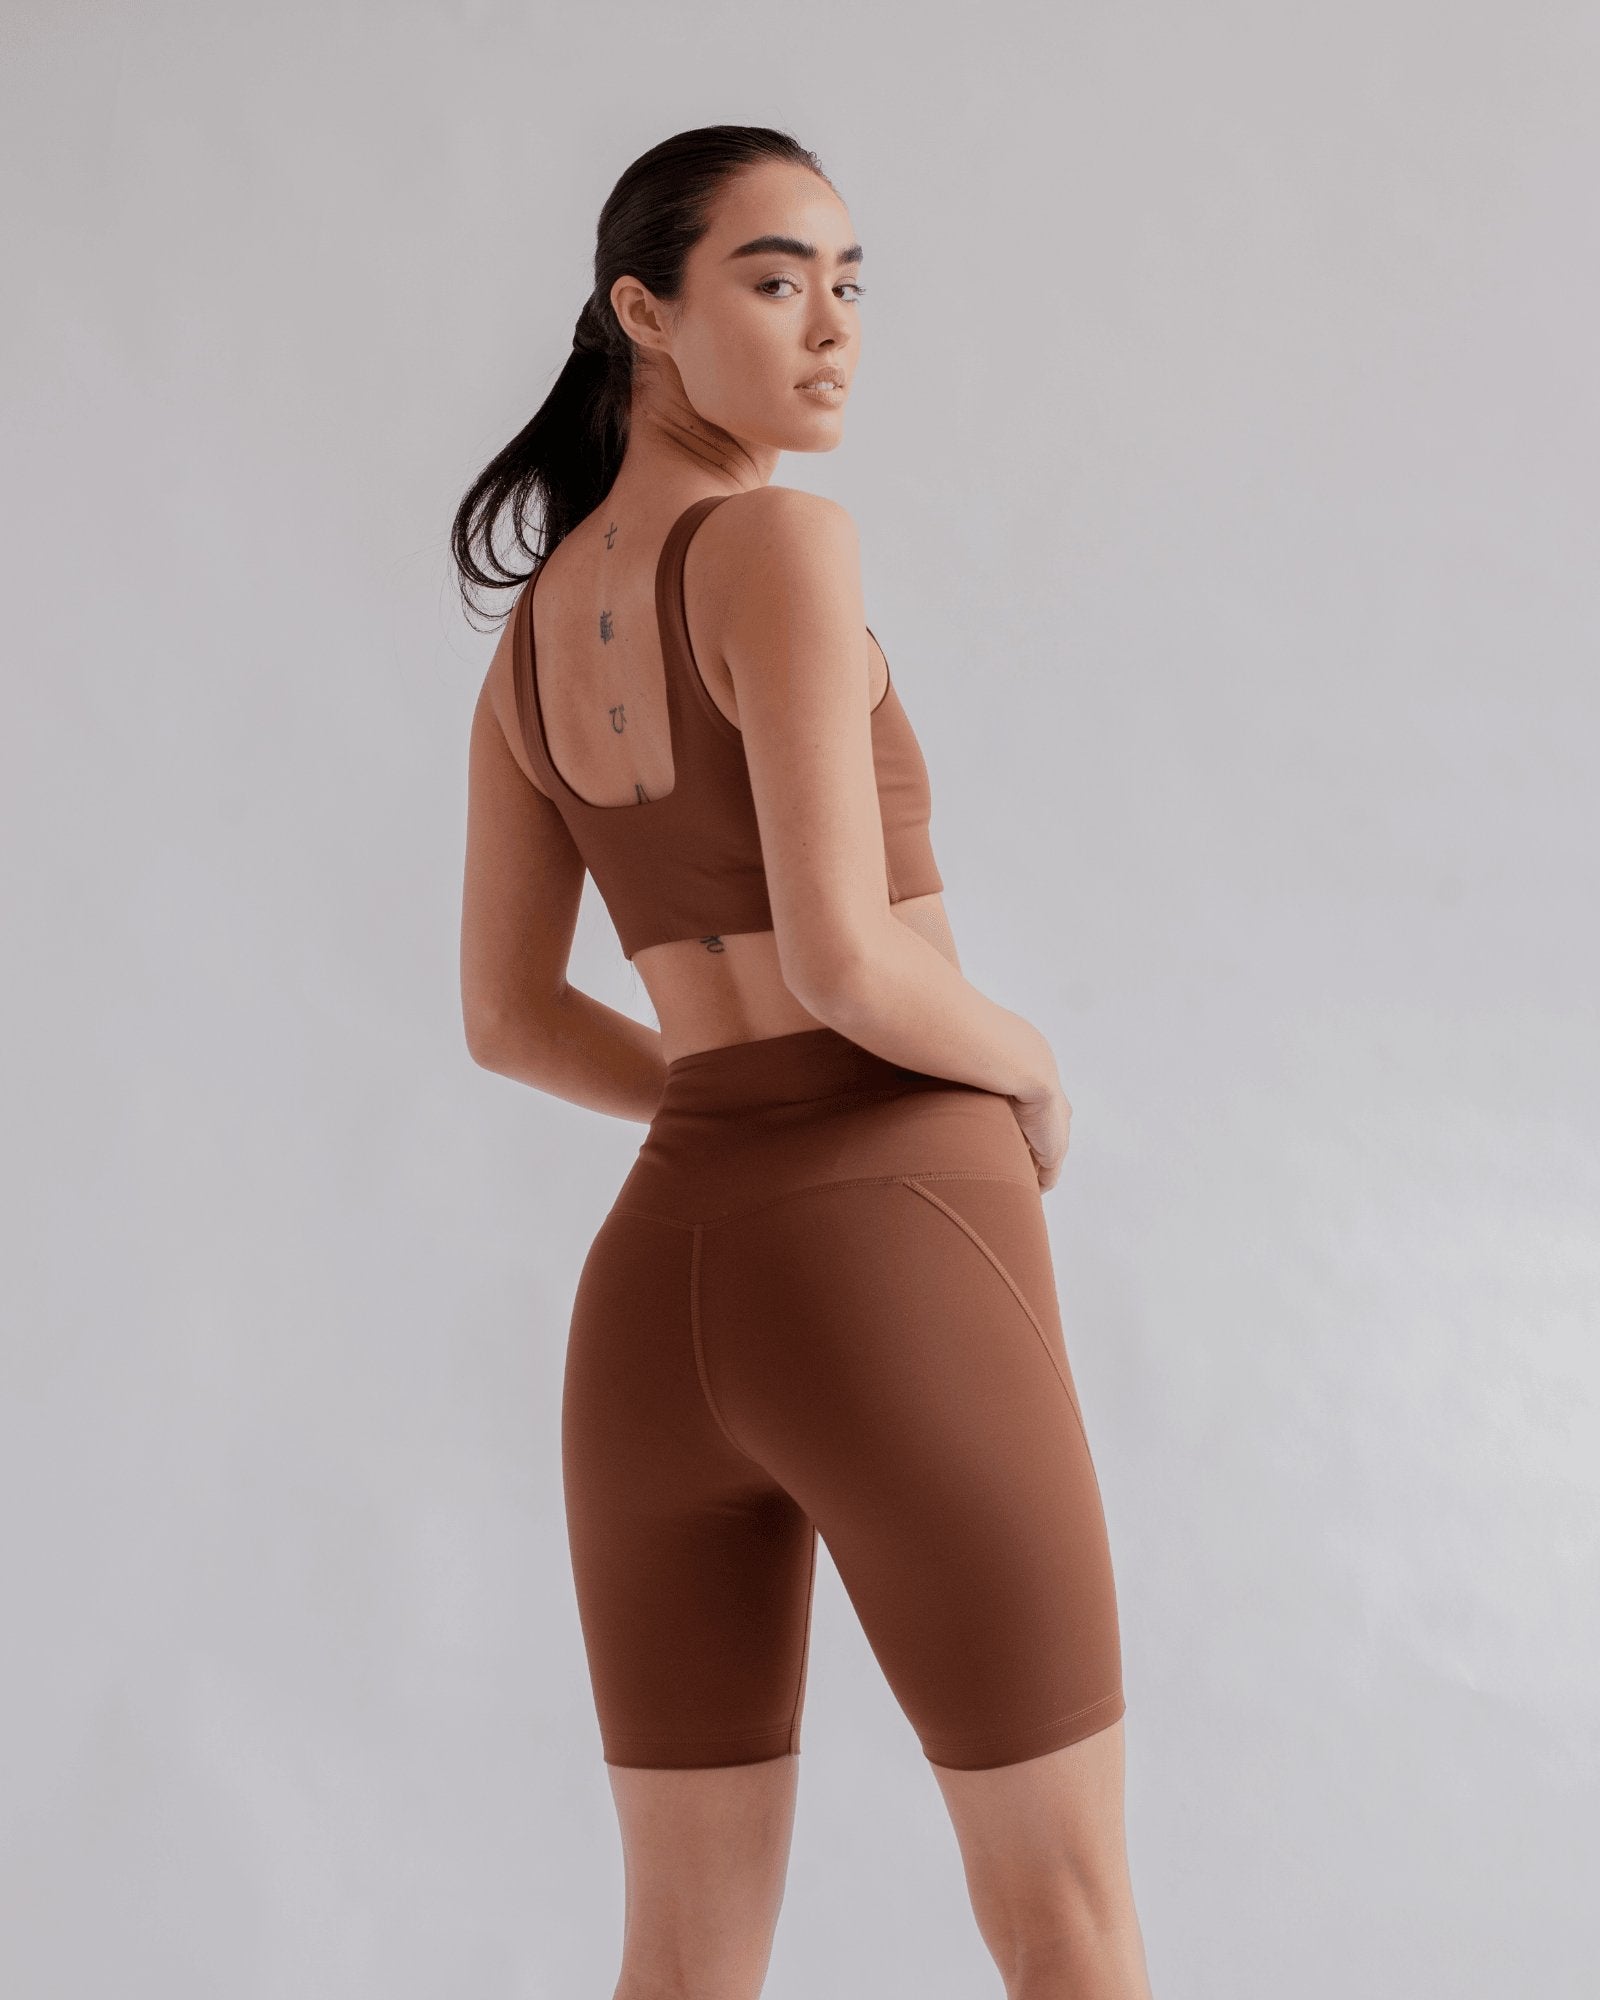 Ribbed Legging from The Simple Folk. Discover ethically-made, sustainable  fashion at OAT & OCHRE. Our slow fashion collections features organic cotton  and timeless designs. Shop now for classic, minimal styles.